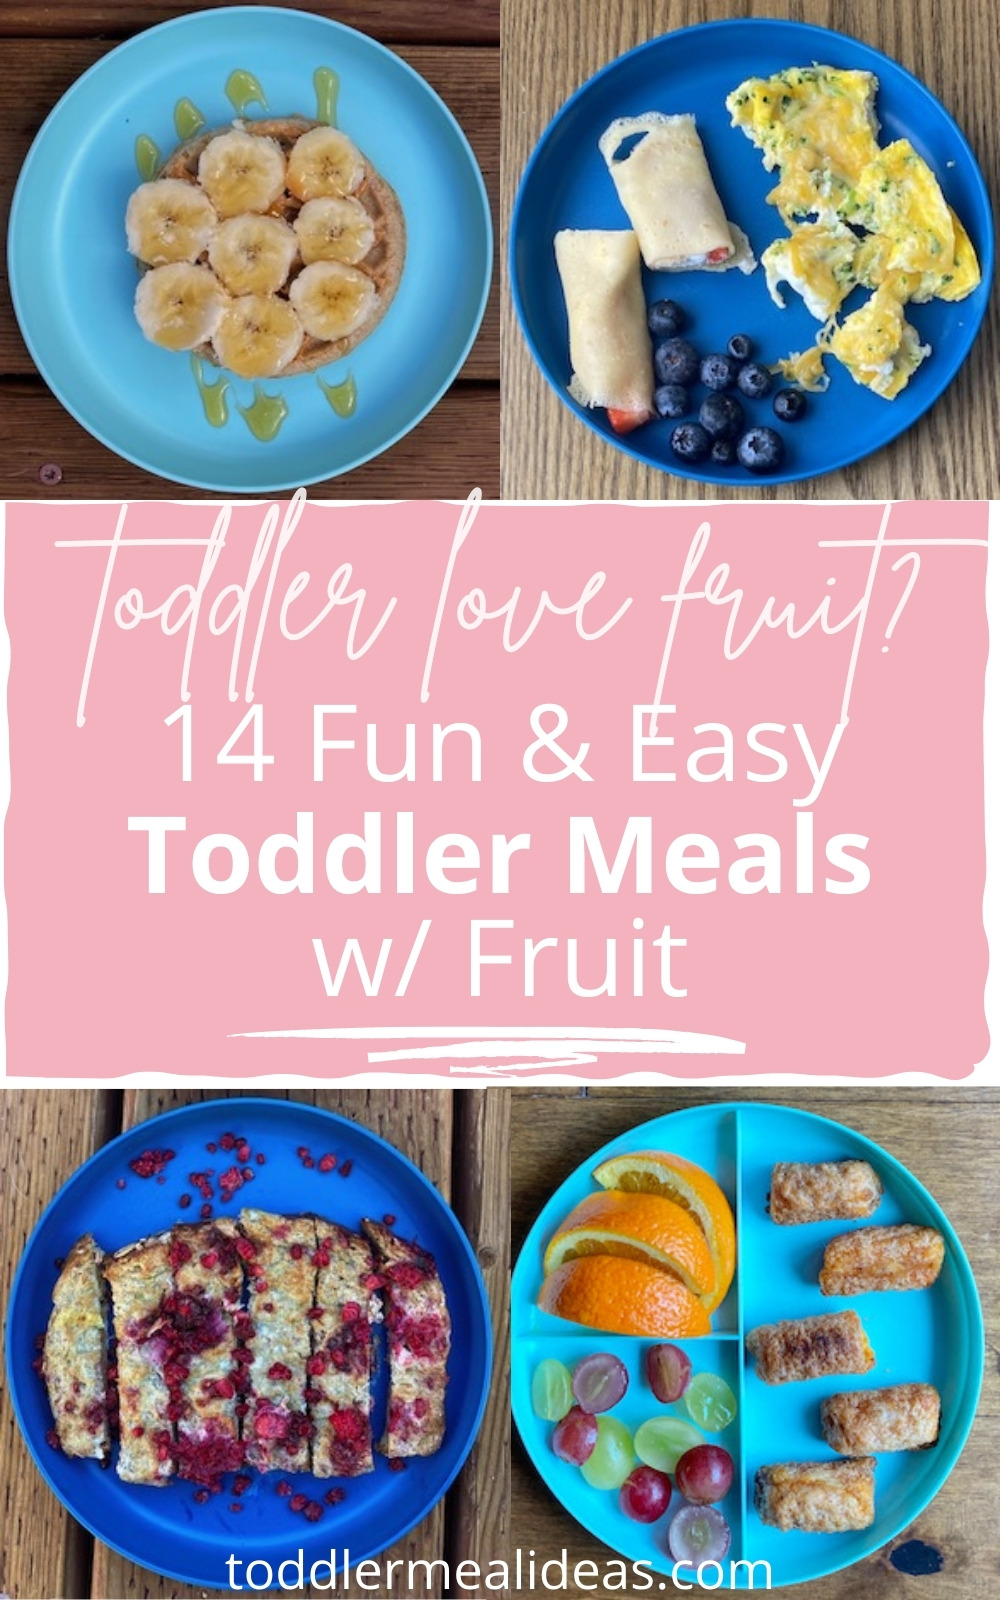 Toddler Meal Ideas with Fruit - Toddler Meal Ideas